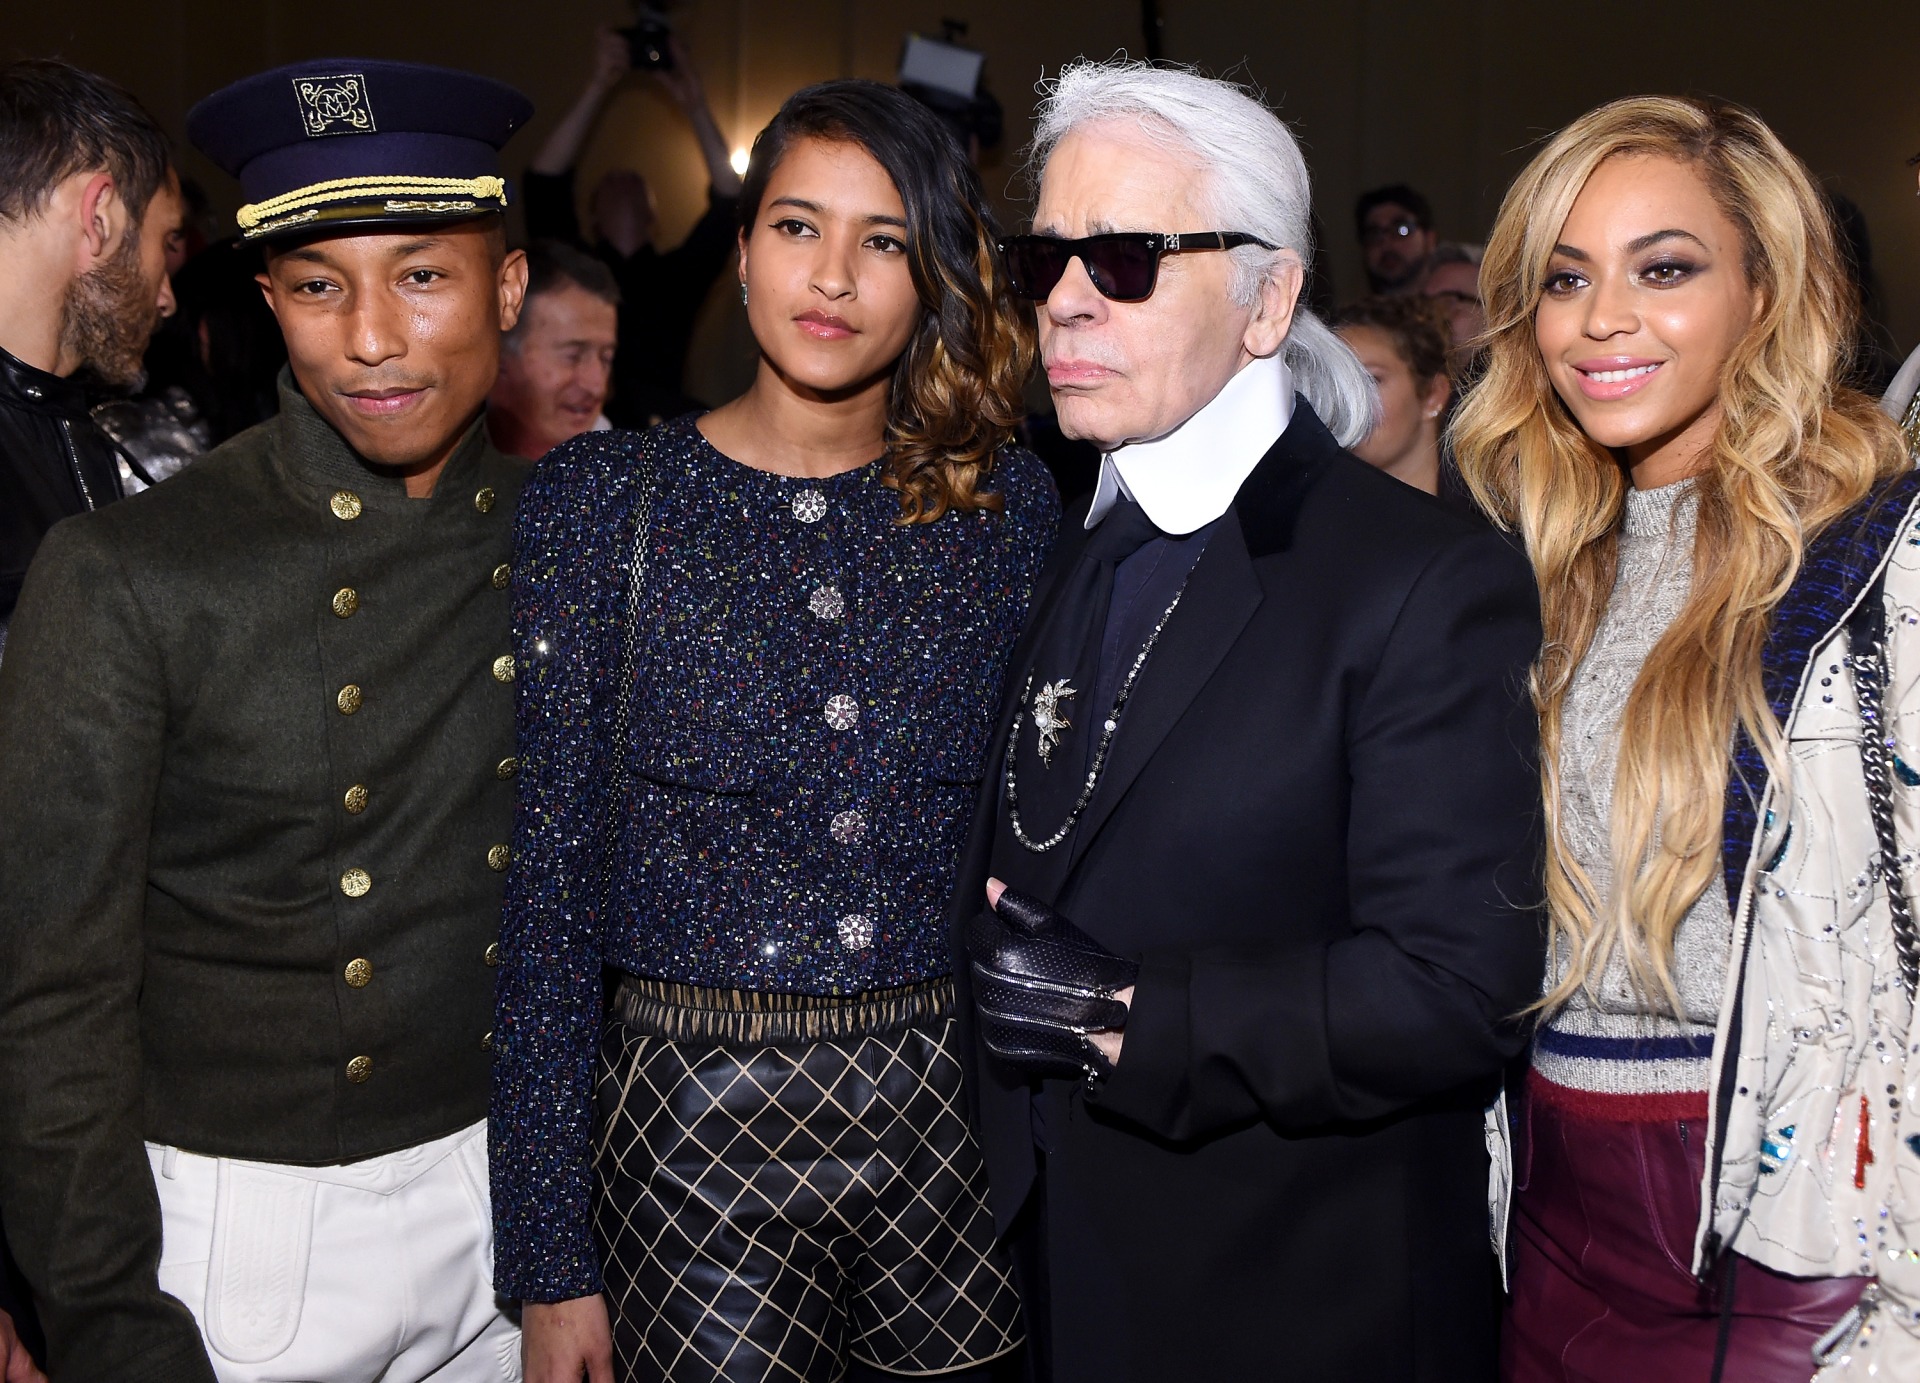 Pharrell Williams, Helen Lasichanh, Chanel Artistic Director Karl Lagerfeld and Beyonce at CHANEL Paris-Salzburg 2014/15 Metiers d'Art Collection in New York City at the Park Avenue Armory on March 31, 2015 in New York City. (Photo by Stefanie Keenan/WireImage)